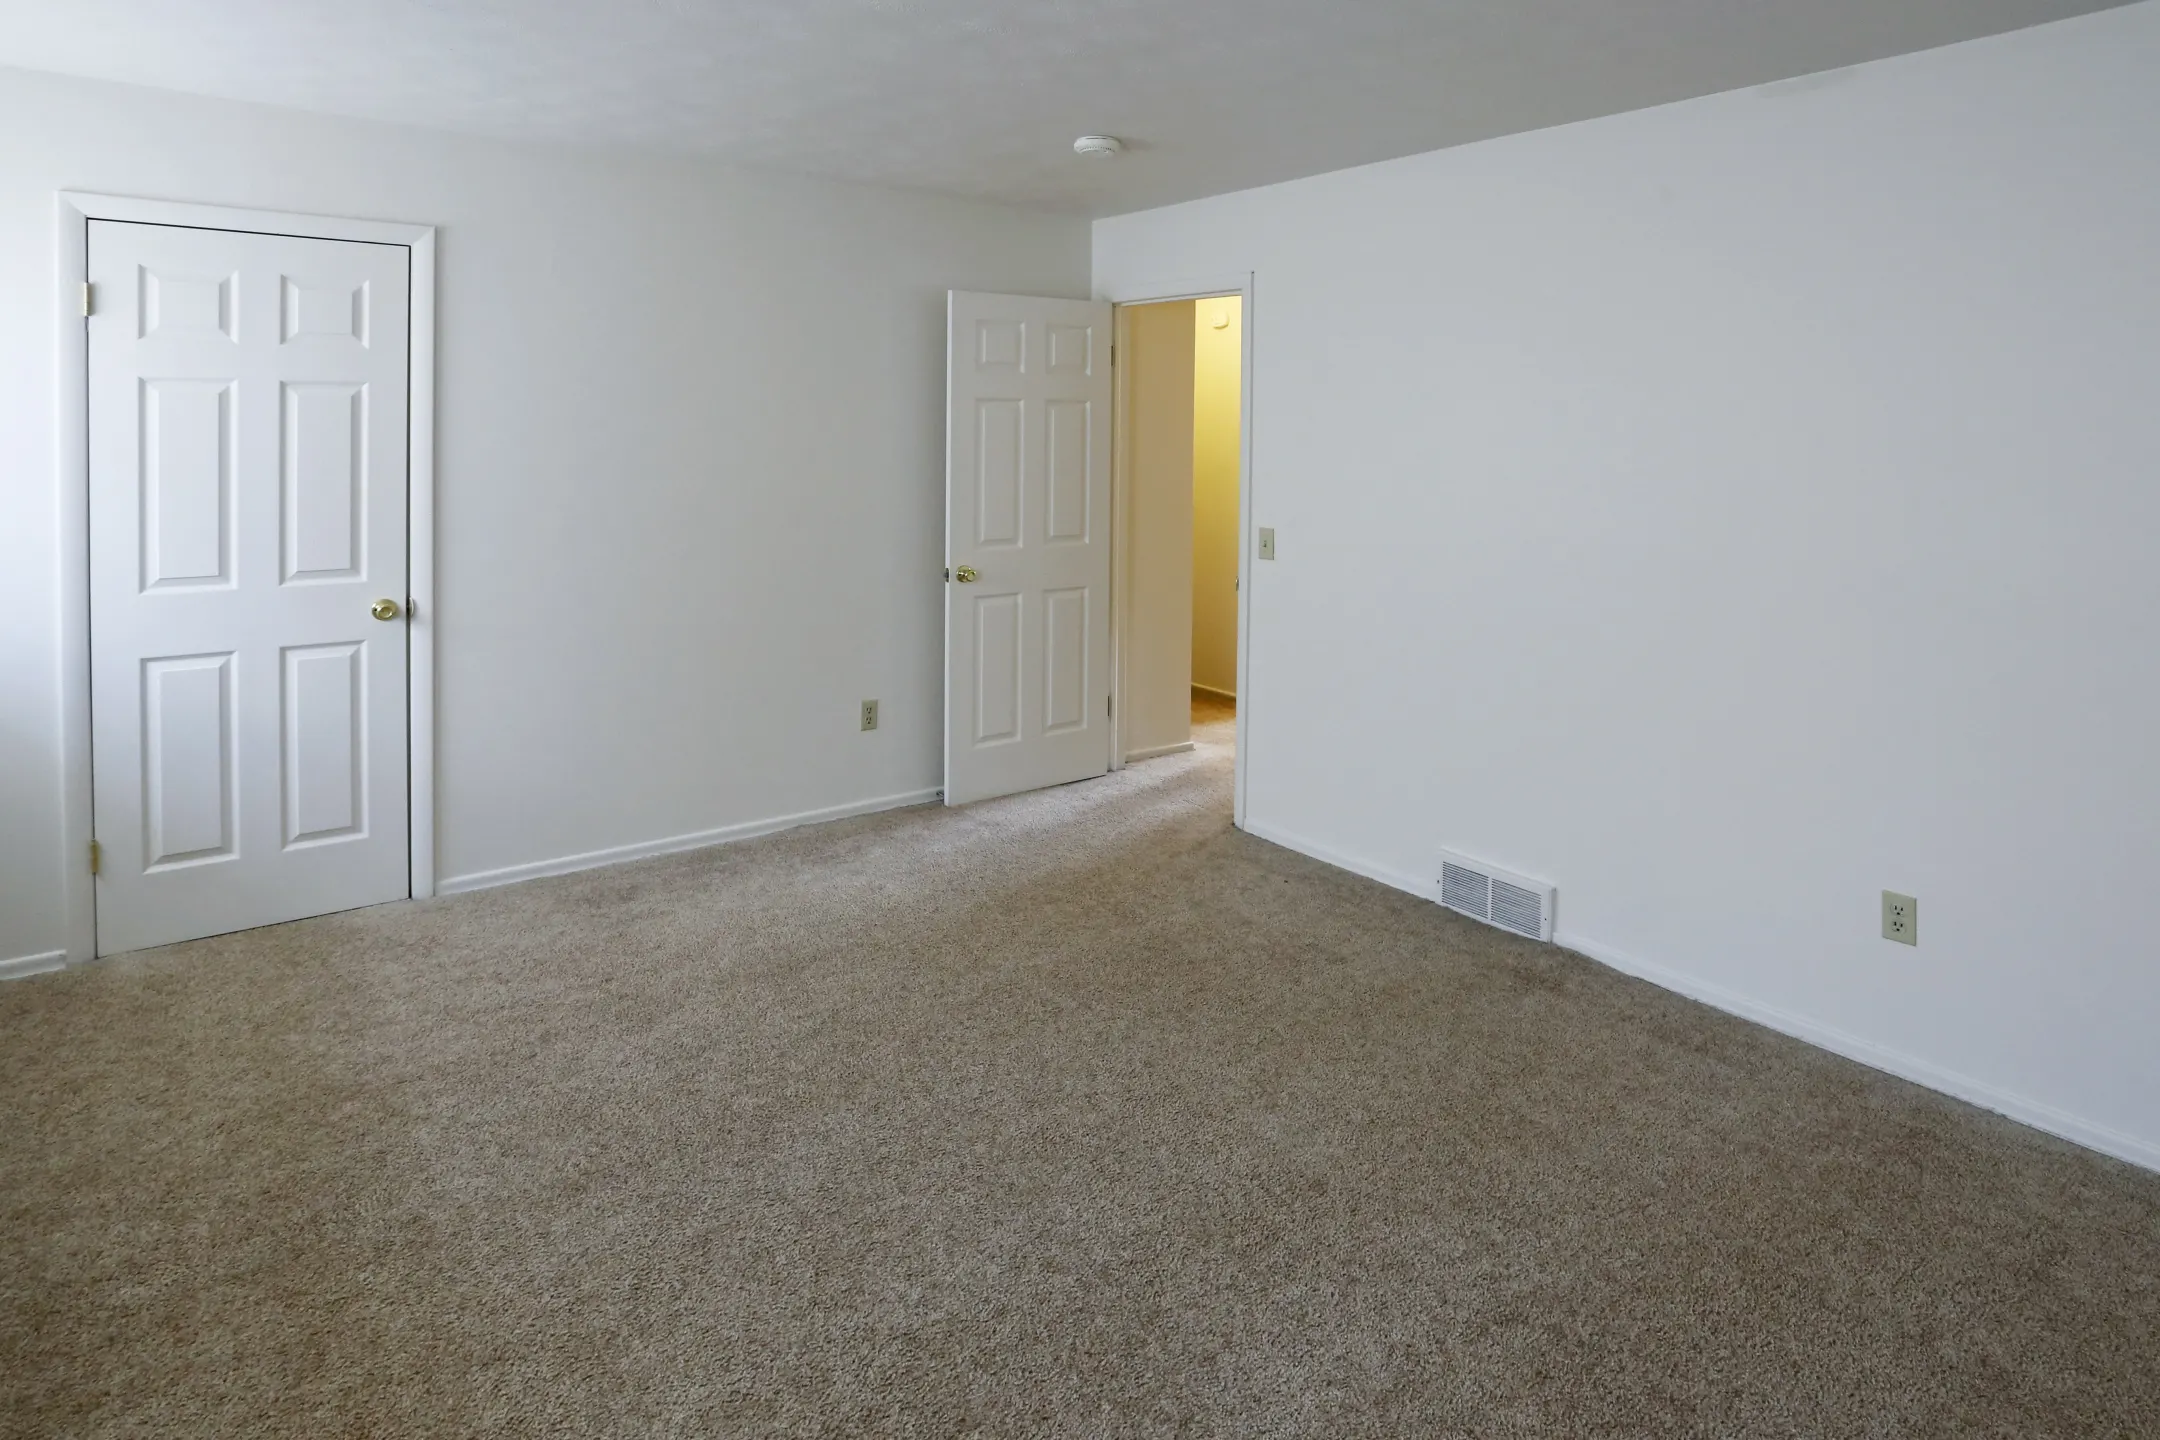 Bedroom - Westbrooke Commons - Rochester, NY